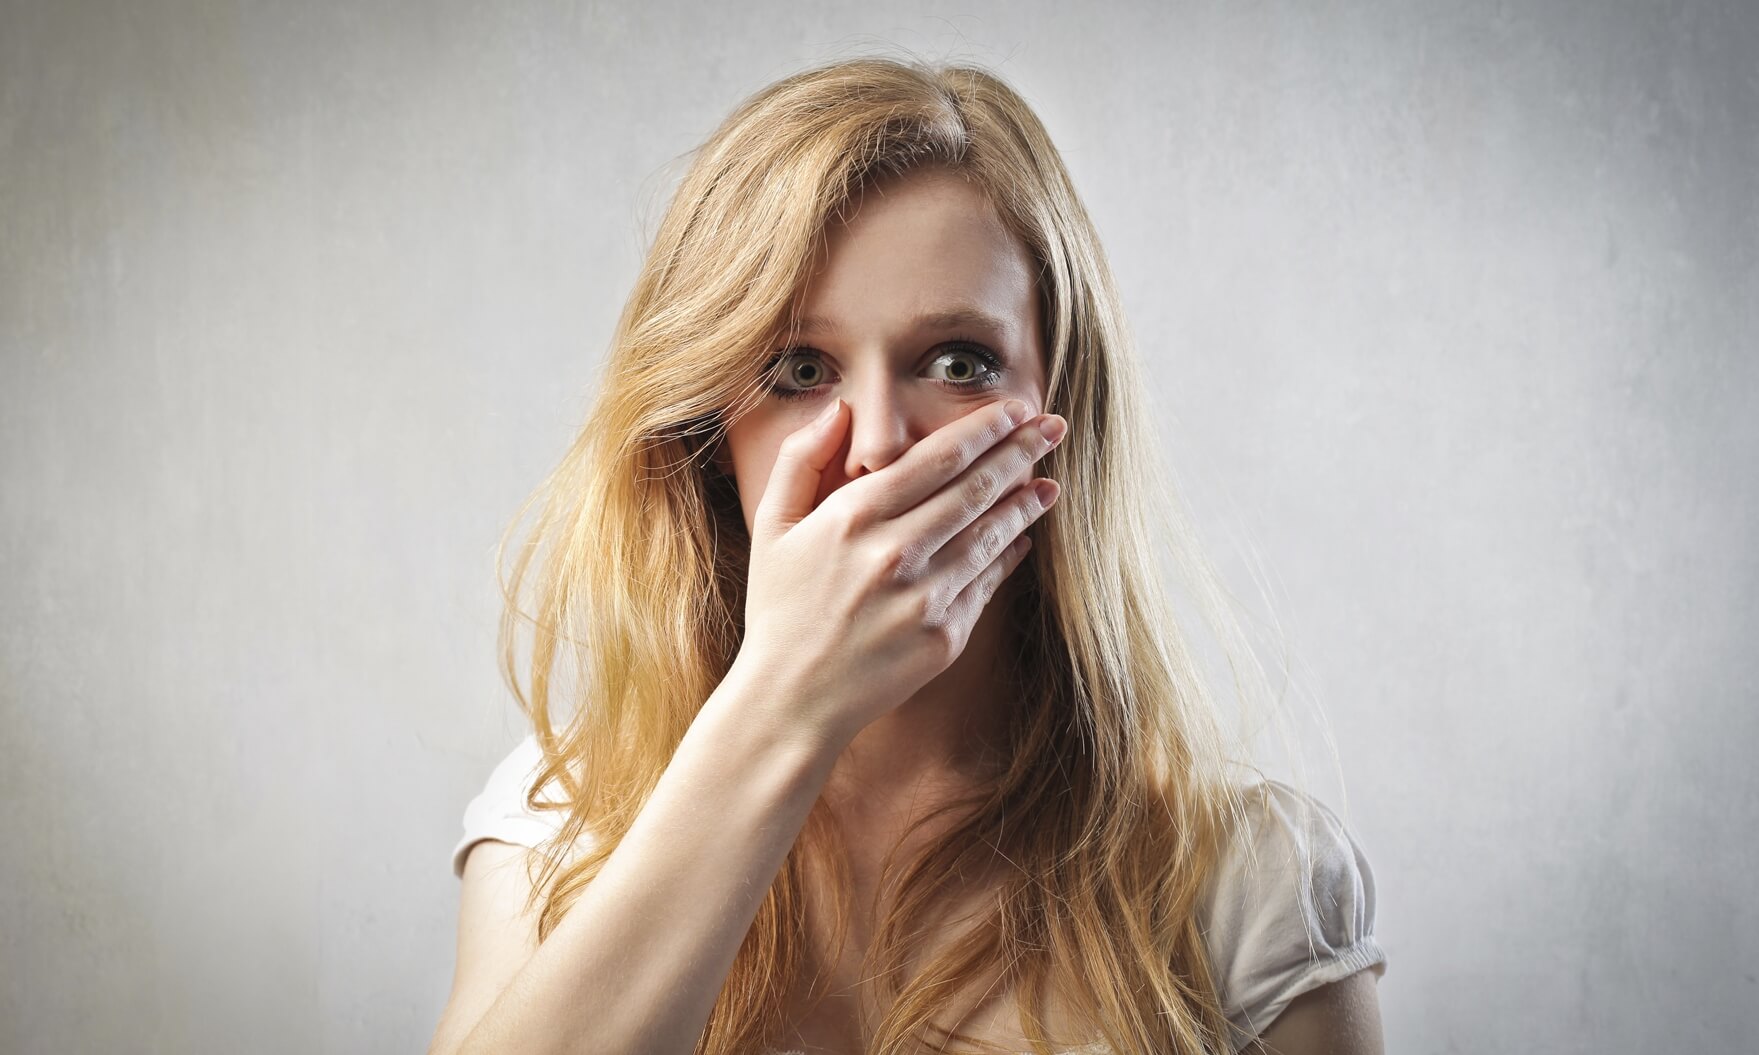 Scared young woman with her hand on her mouth